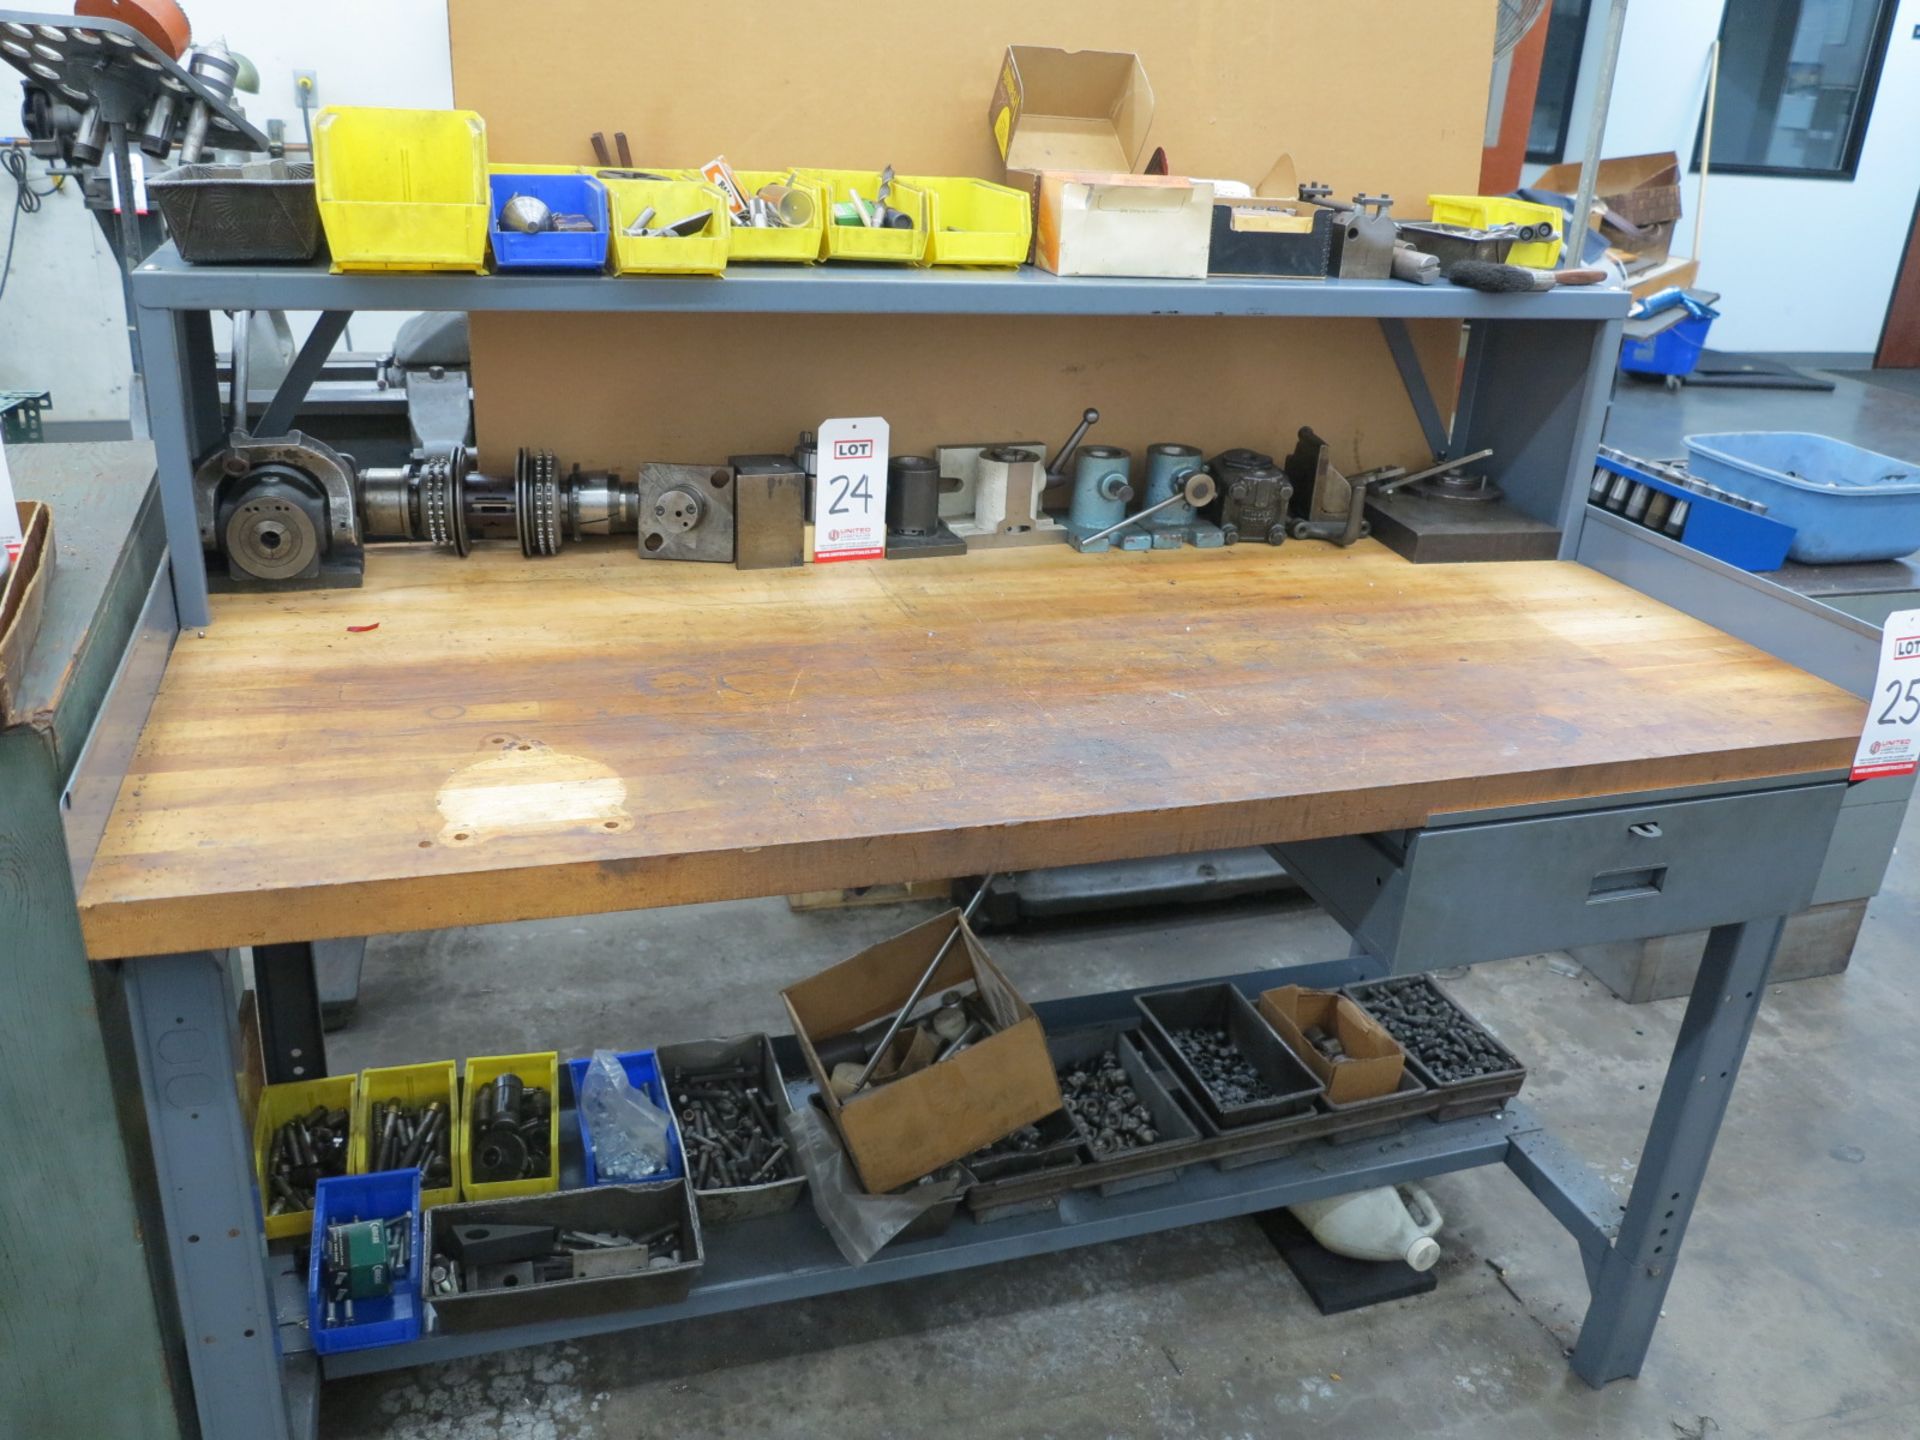 BUTCHER TOP WORKBENCH, 60" X 30", CONTENTS NOT INCLUDED